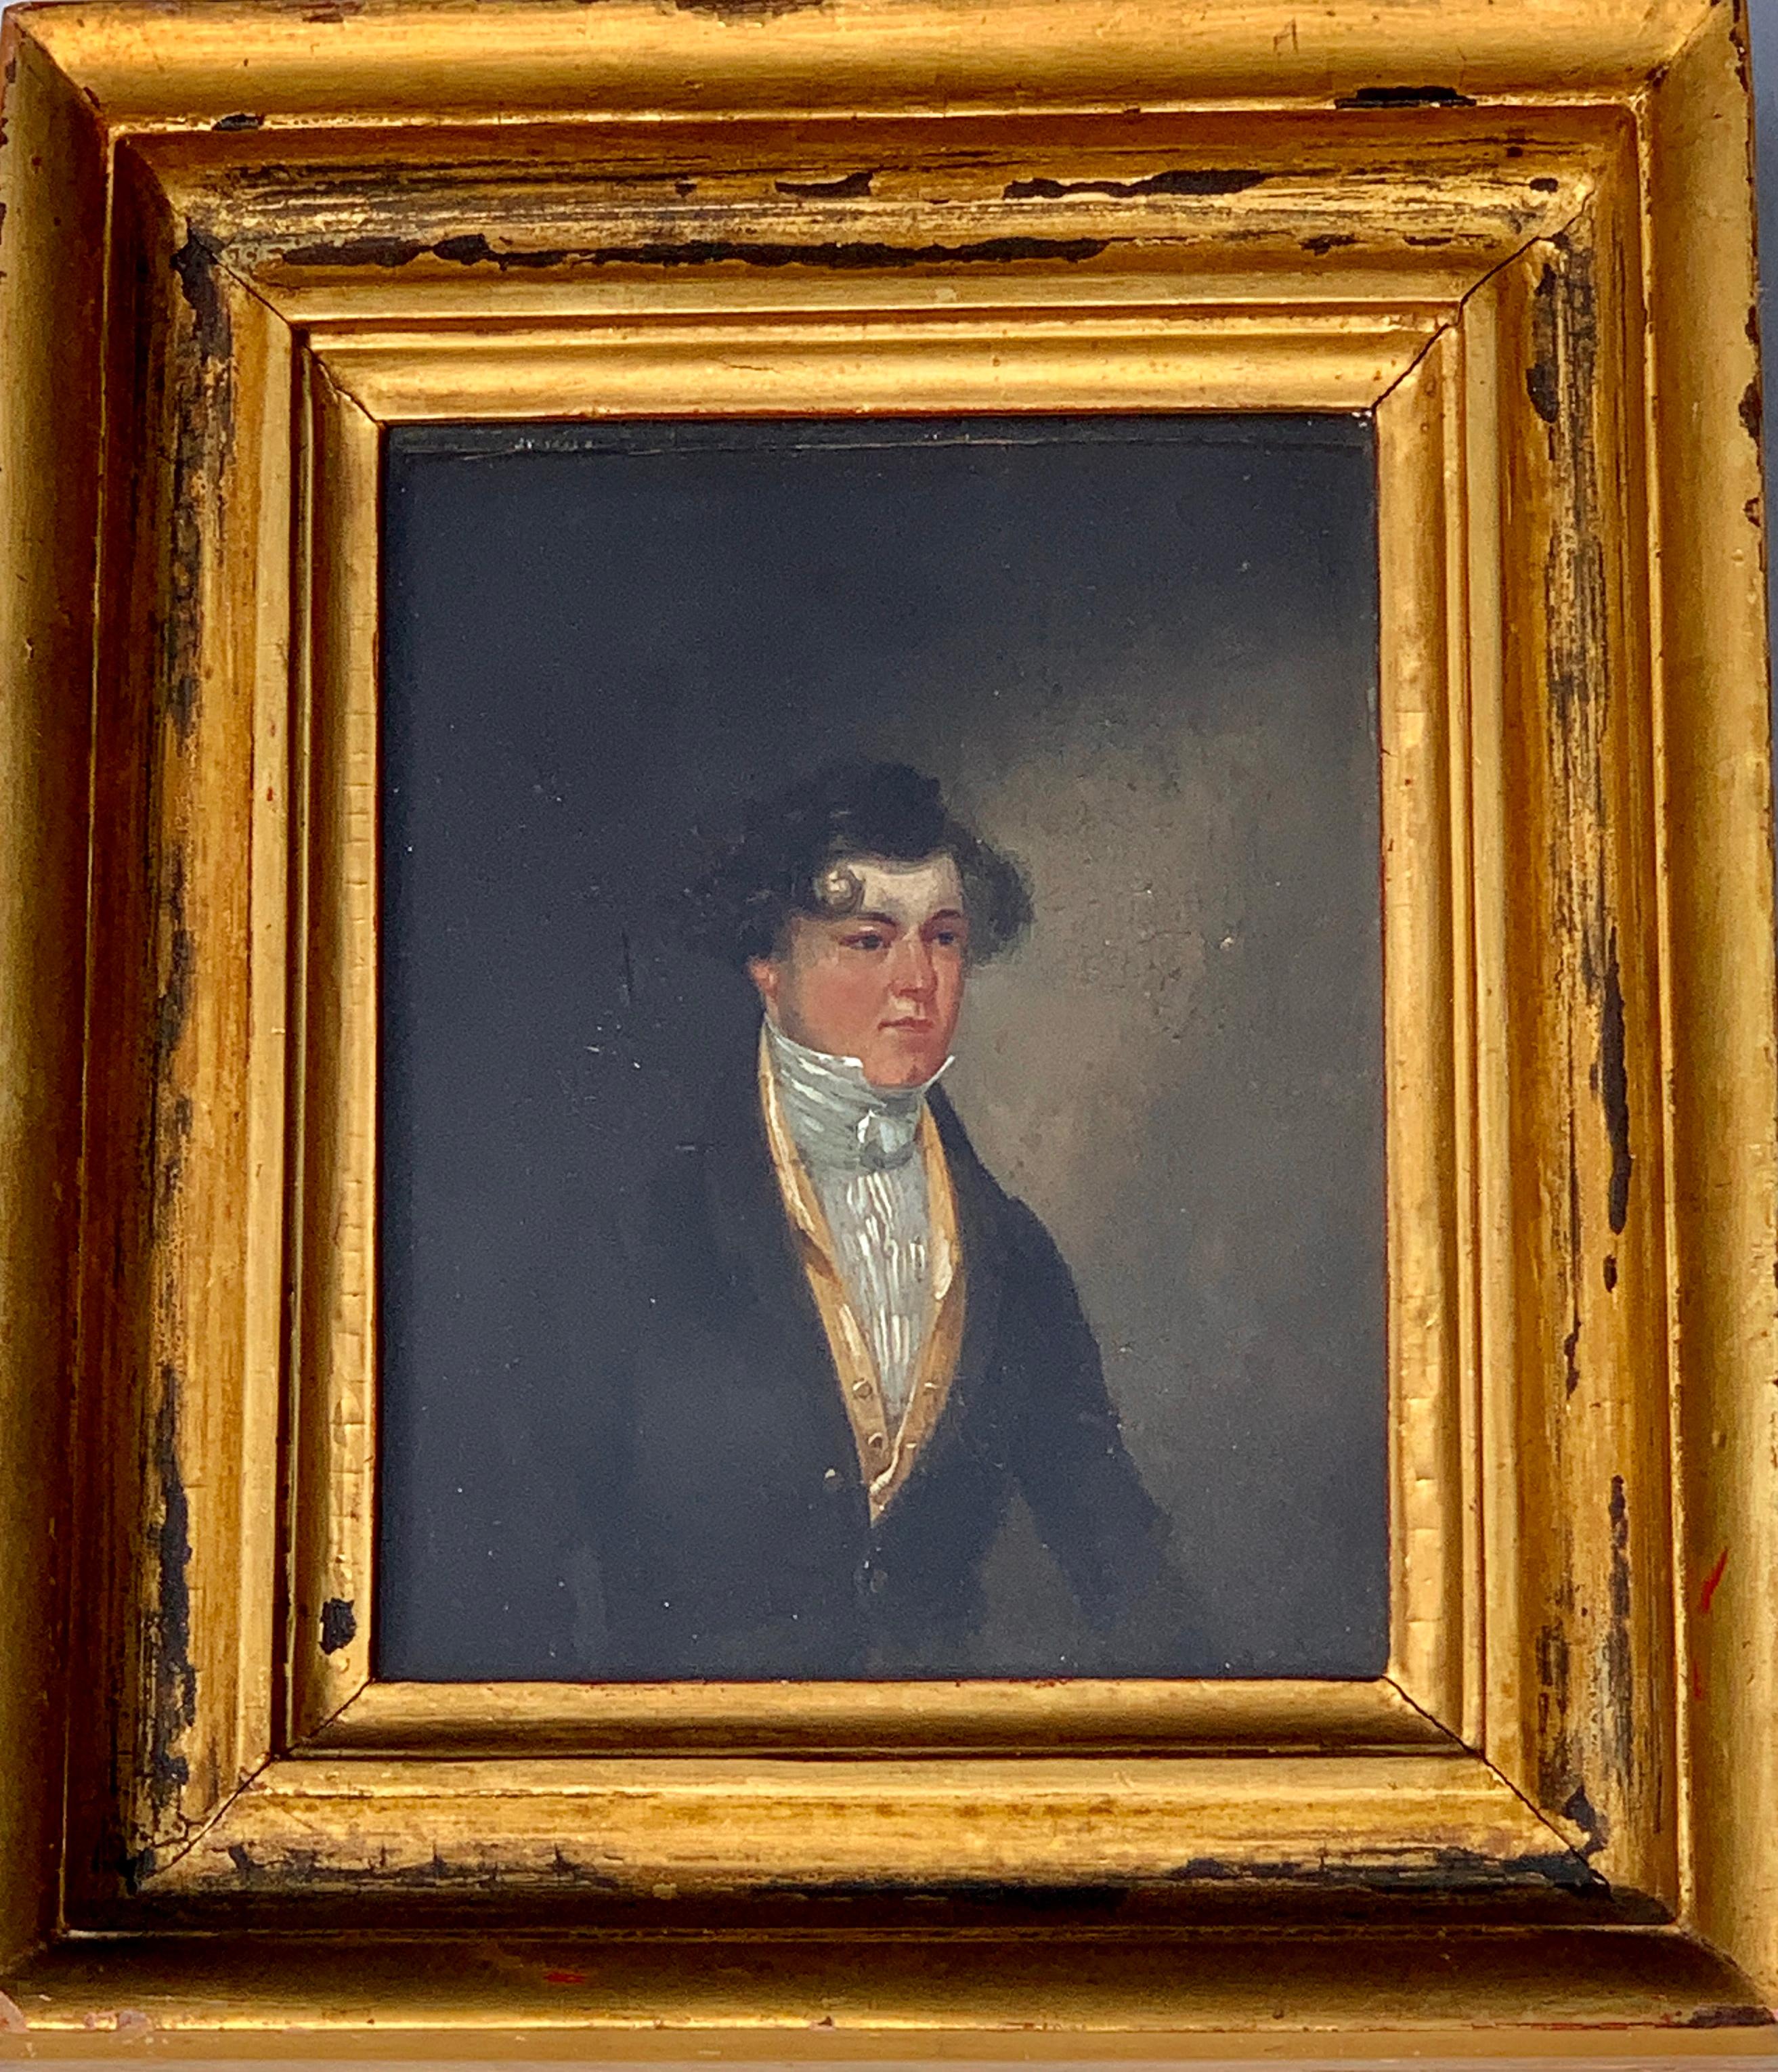 Unknown Figurative Painting - Early Victorian English / British 19th century Portrait of a young man